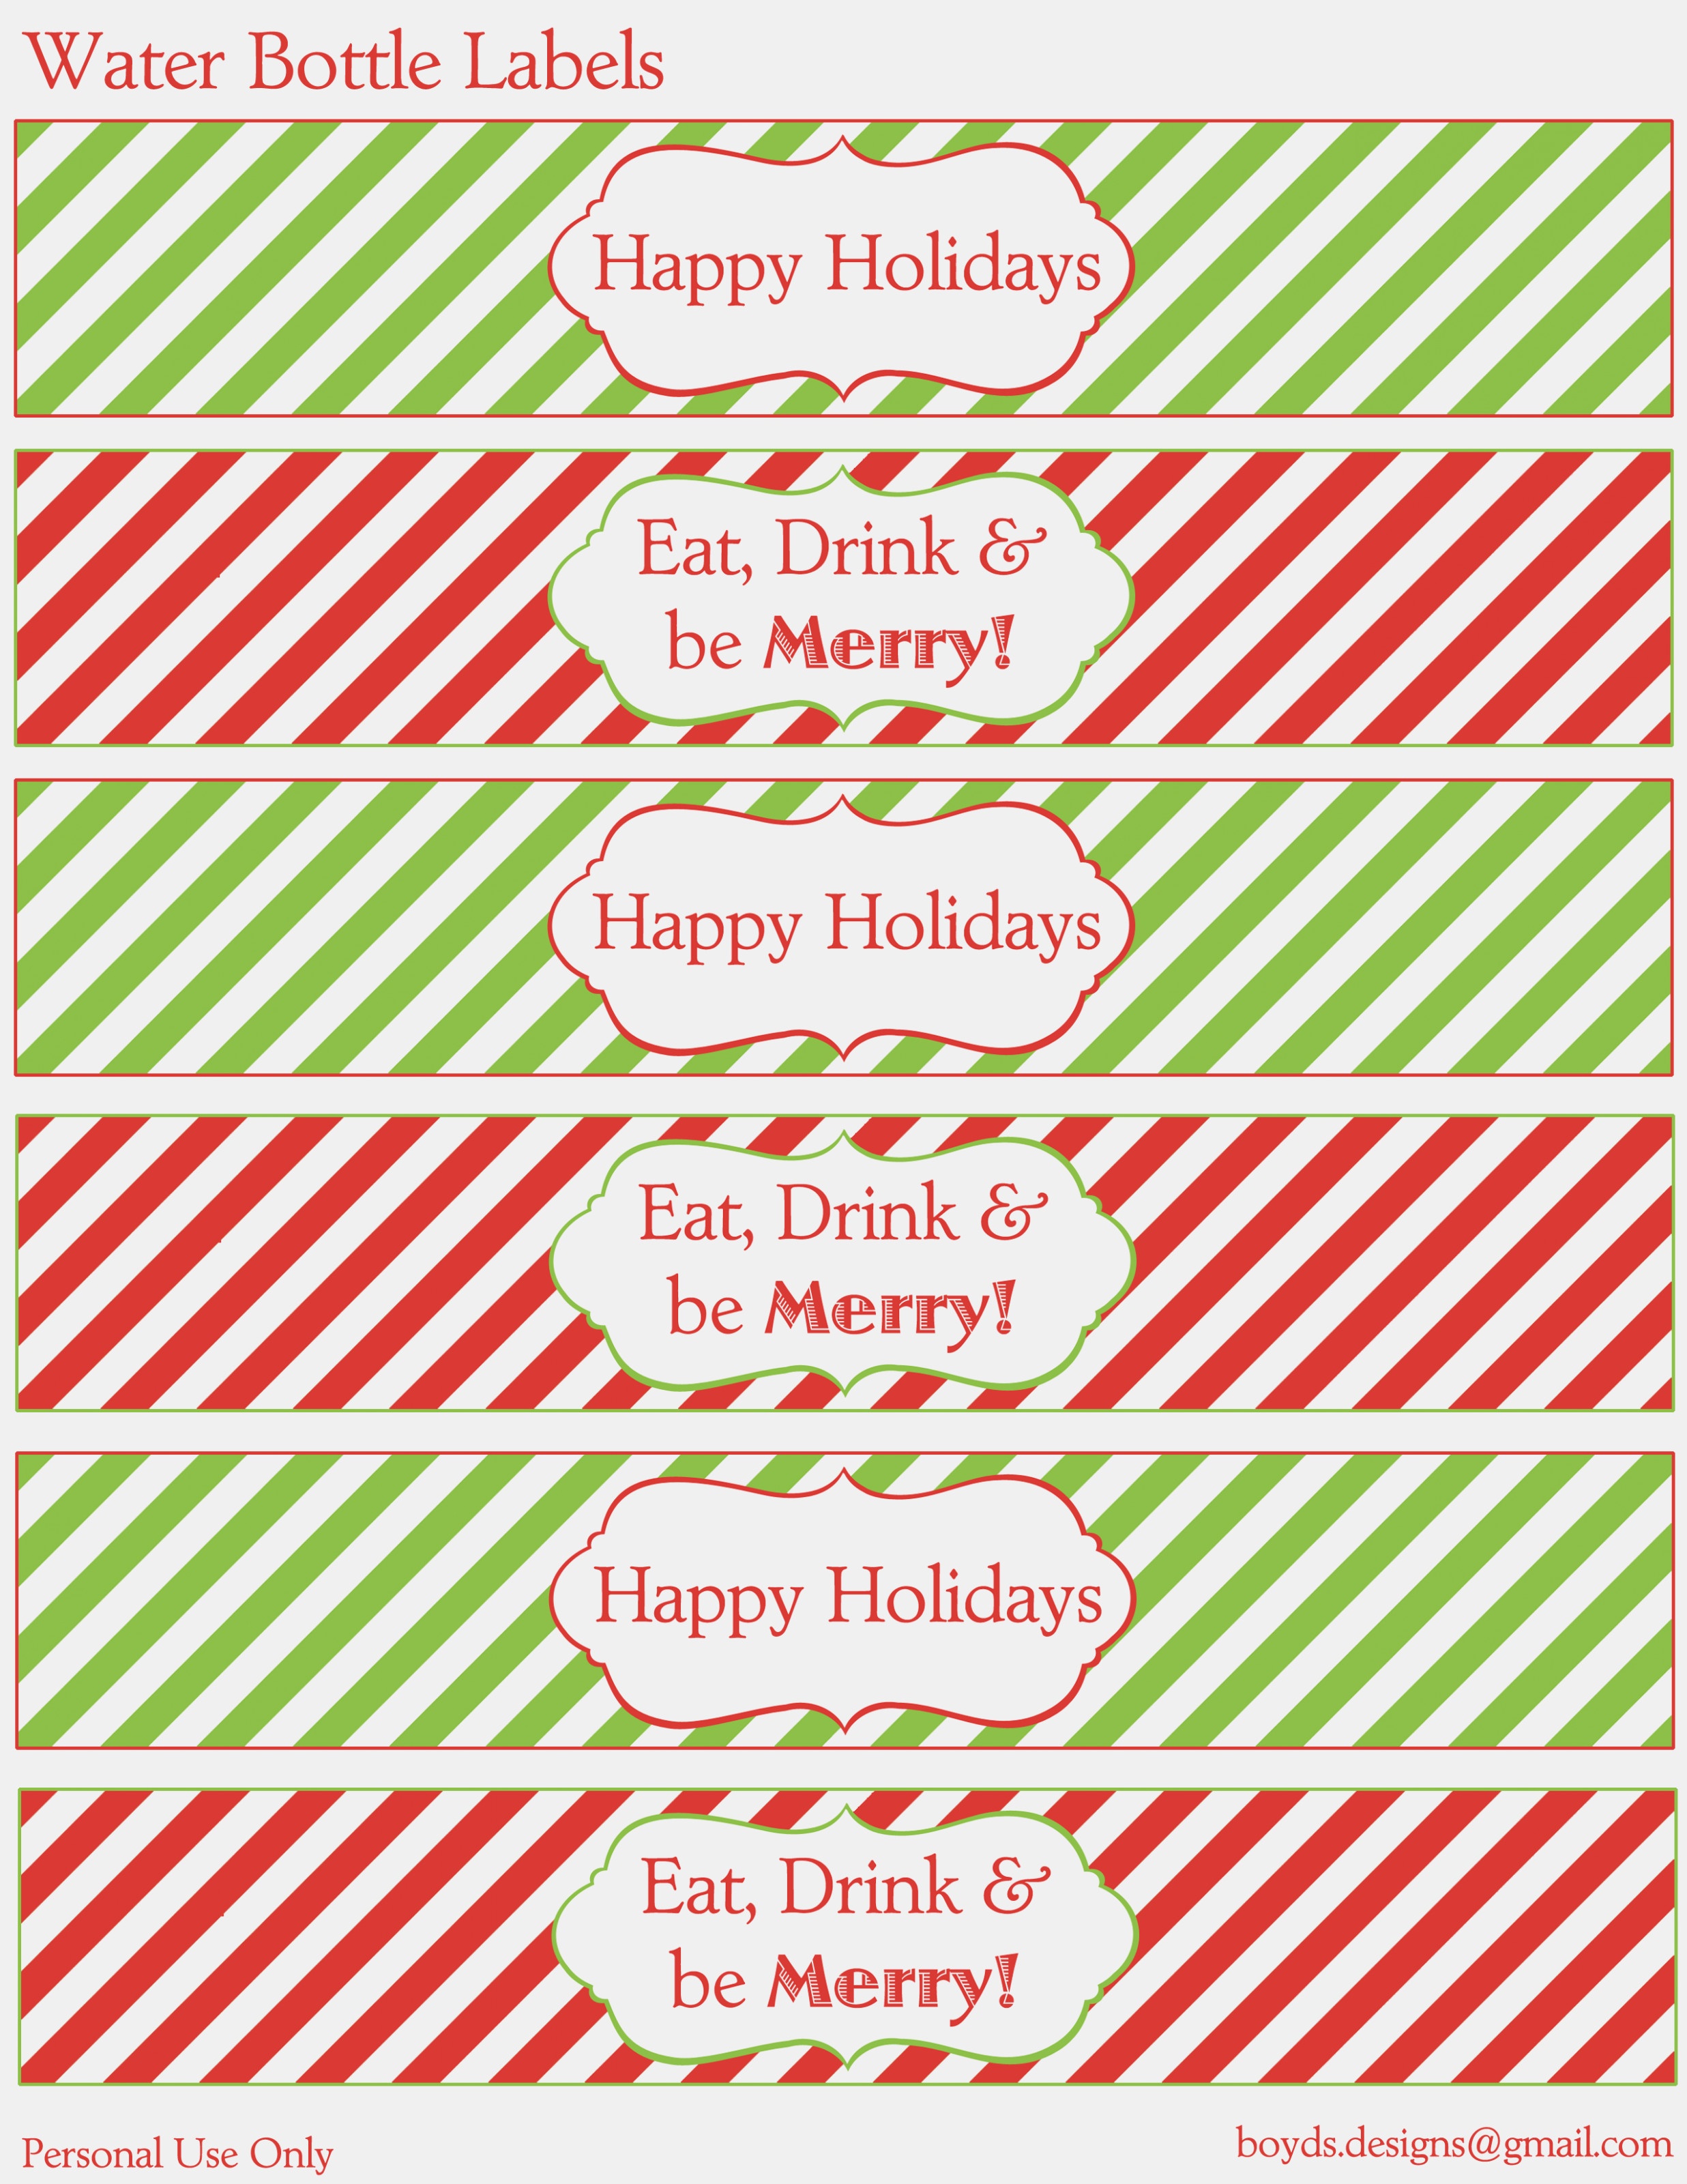 free-printable-christmas-water-bottle-labels